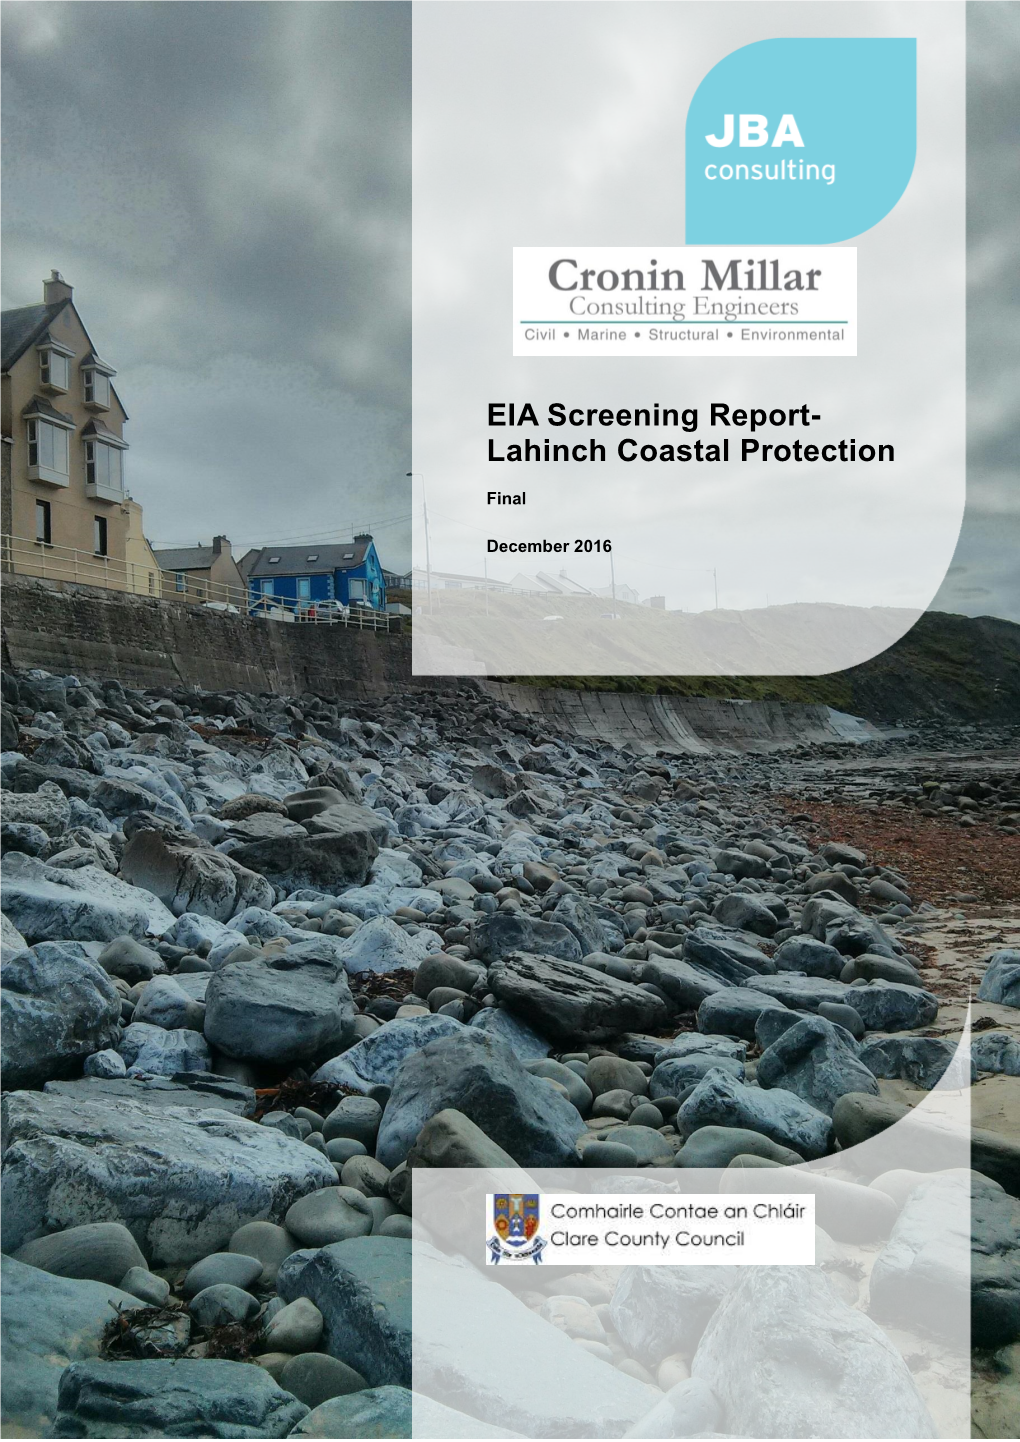 JBA Consulting-Cronin Millar Consulting Engineers Consortium for the Proposed Coastal Protection and Sea Defence Works at Lahinch, Co